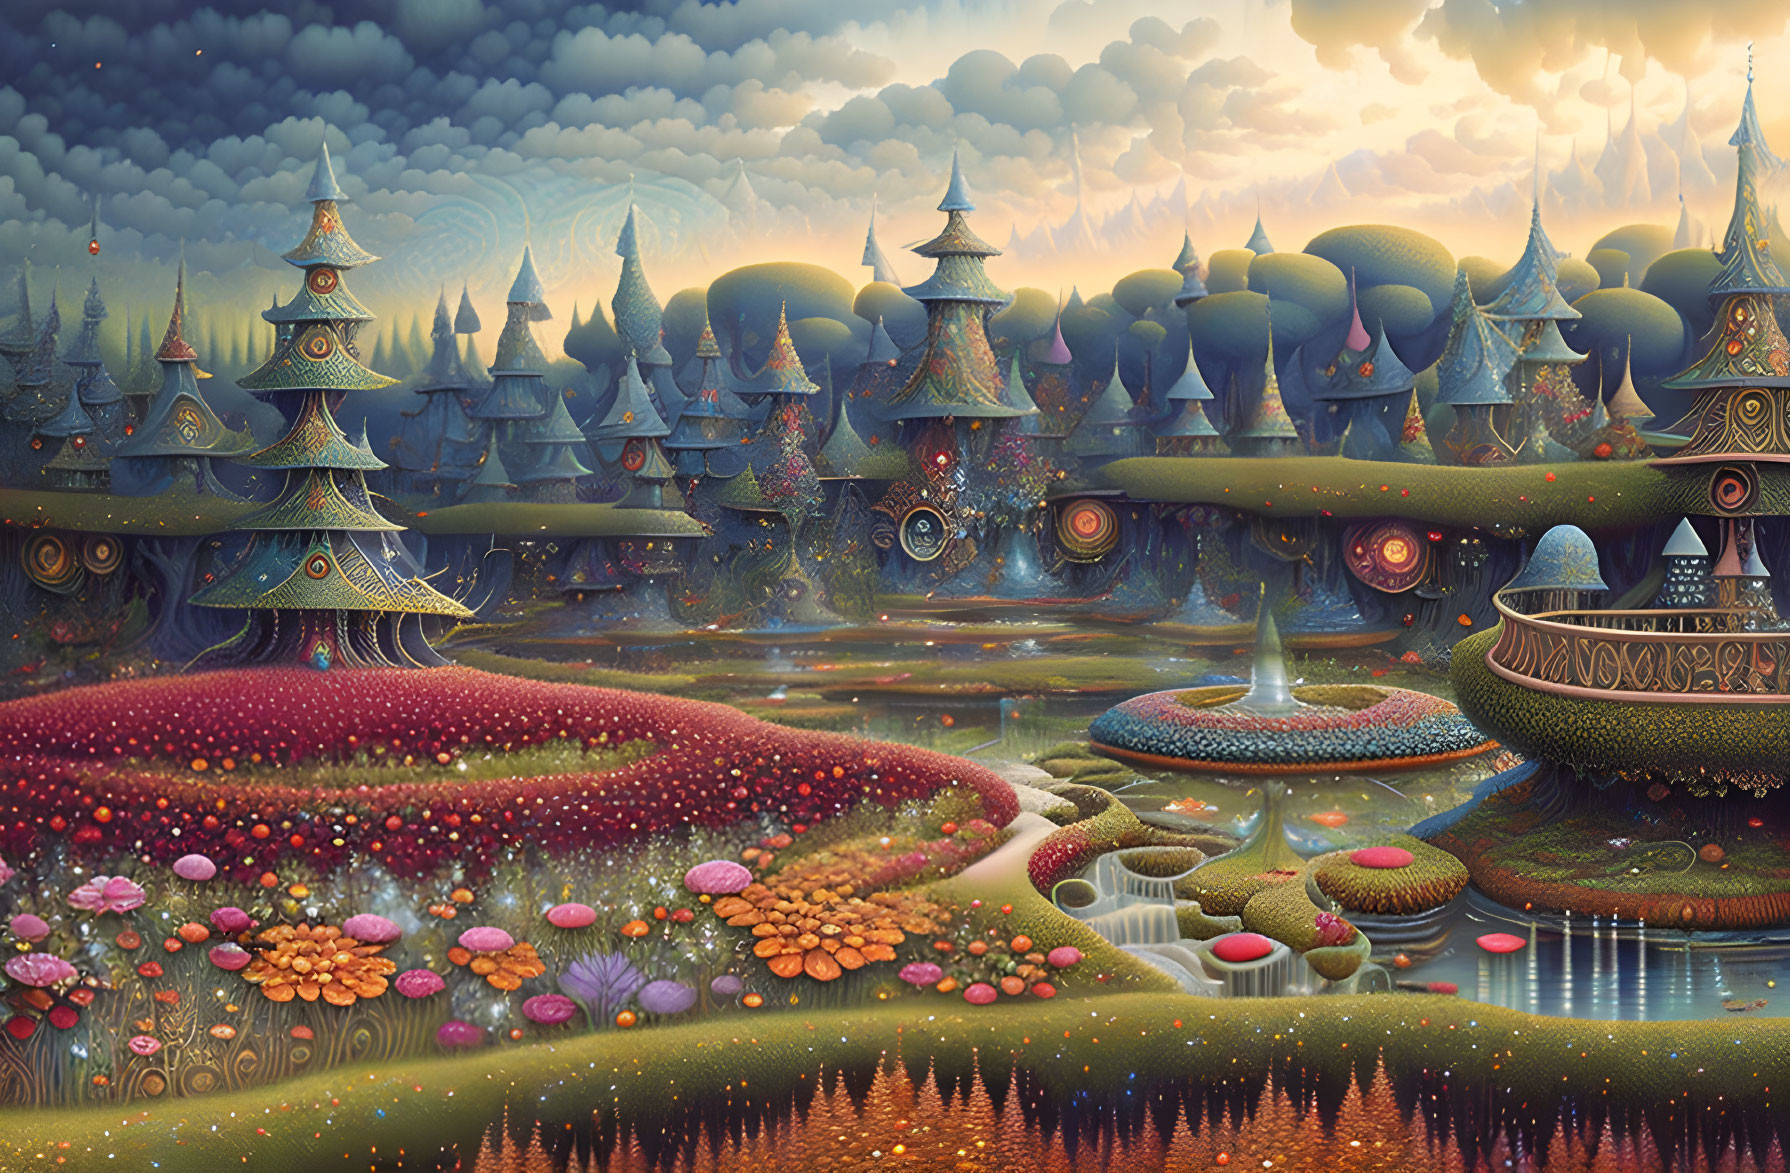 Fantastical landscape with whimsical trees and colorful flora